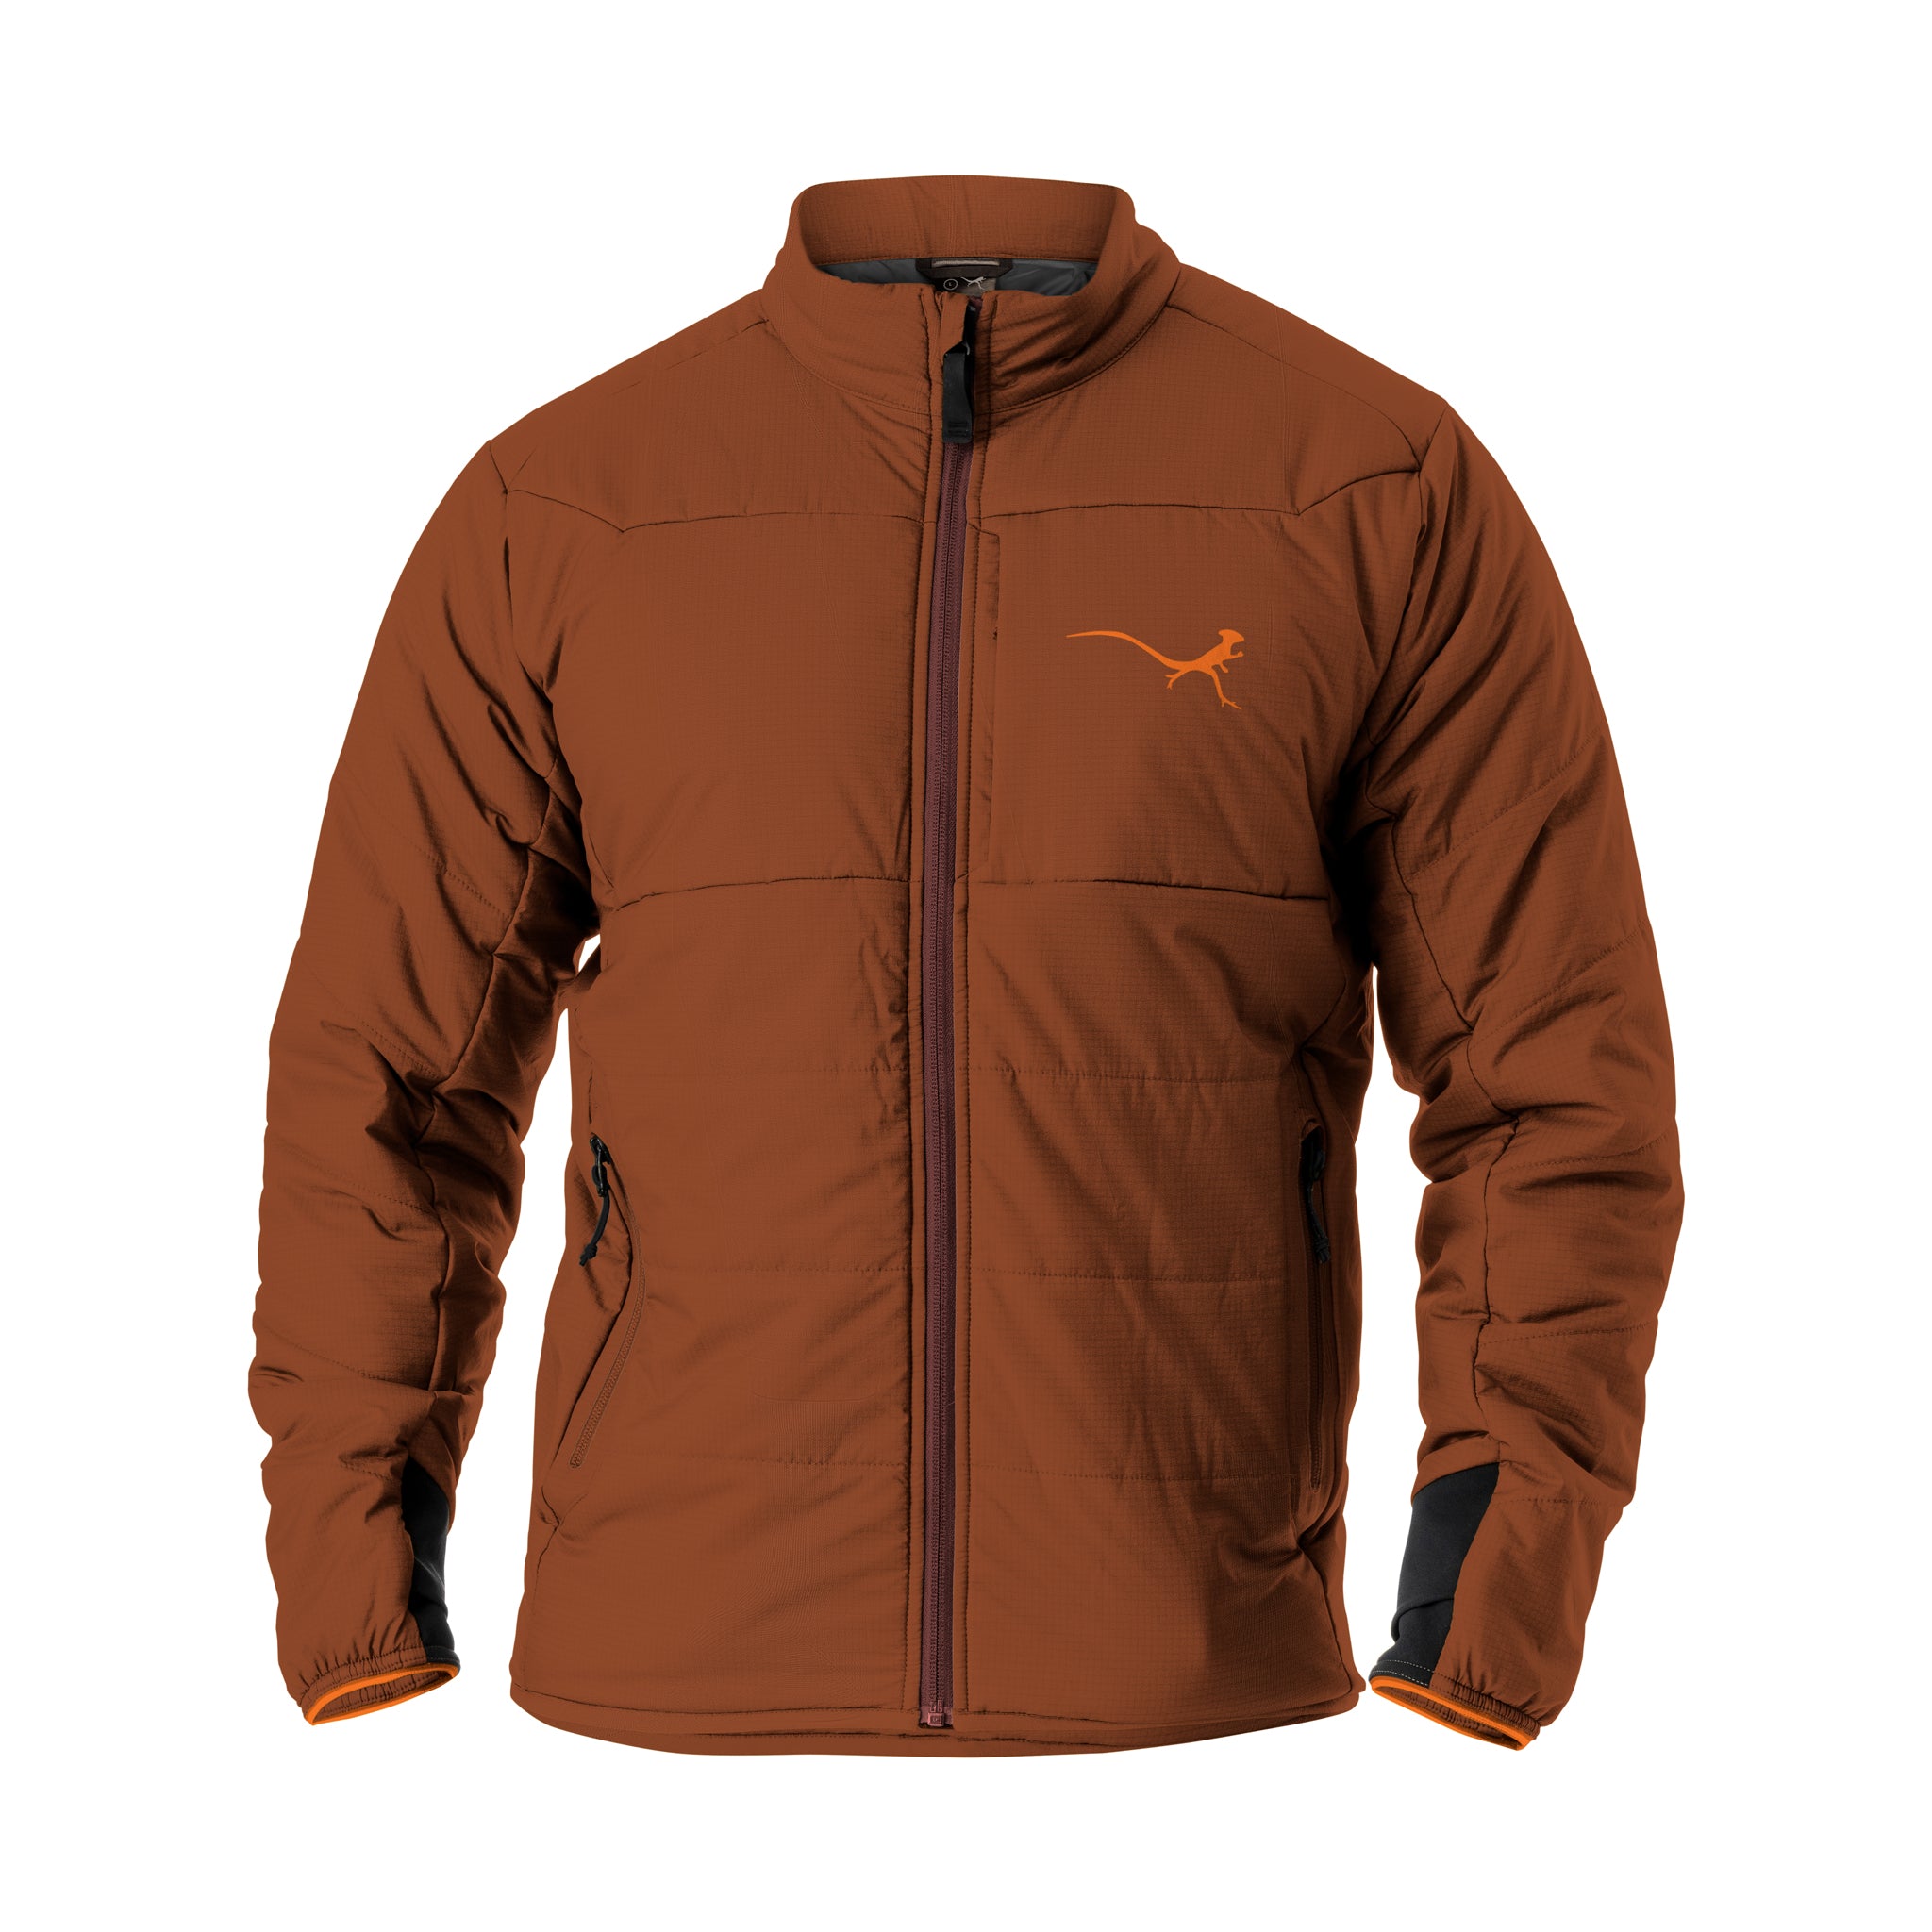 Buy Woodland Winter Jackets Online At Best Price Offers In India